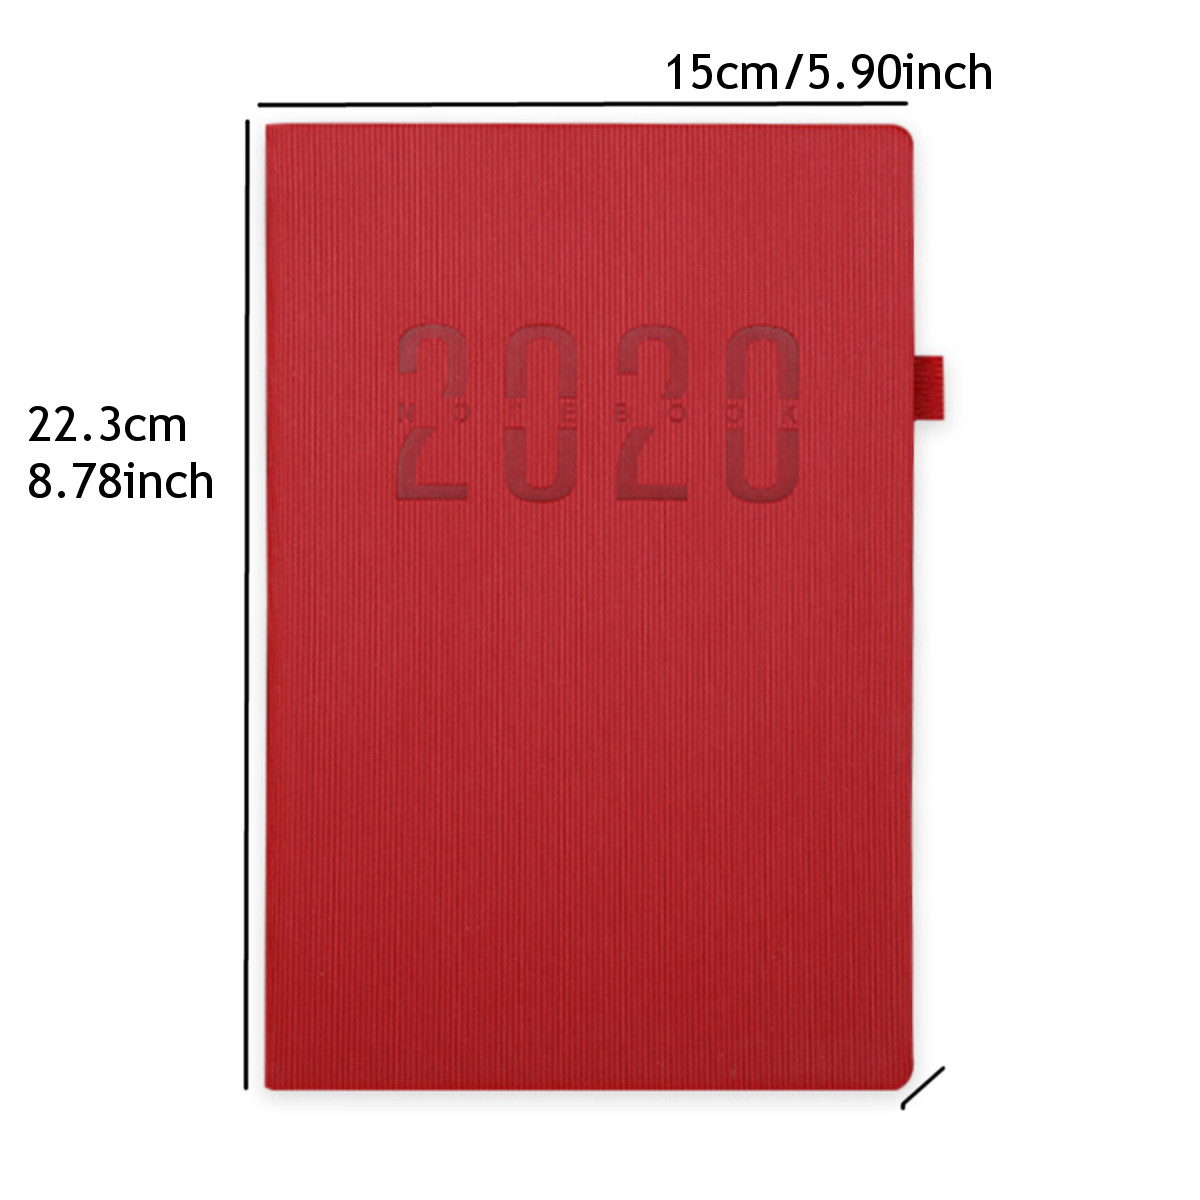 A5-Size-2020-Planner-Agenda-Annual-Calendar-Notebook-Portable-Weekly-Notes-Manual-DIY-Diary-Monthly--1621745-7